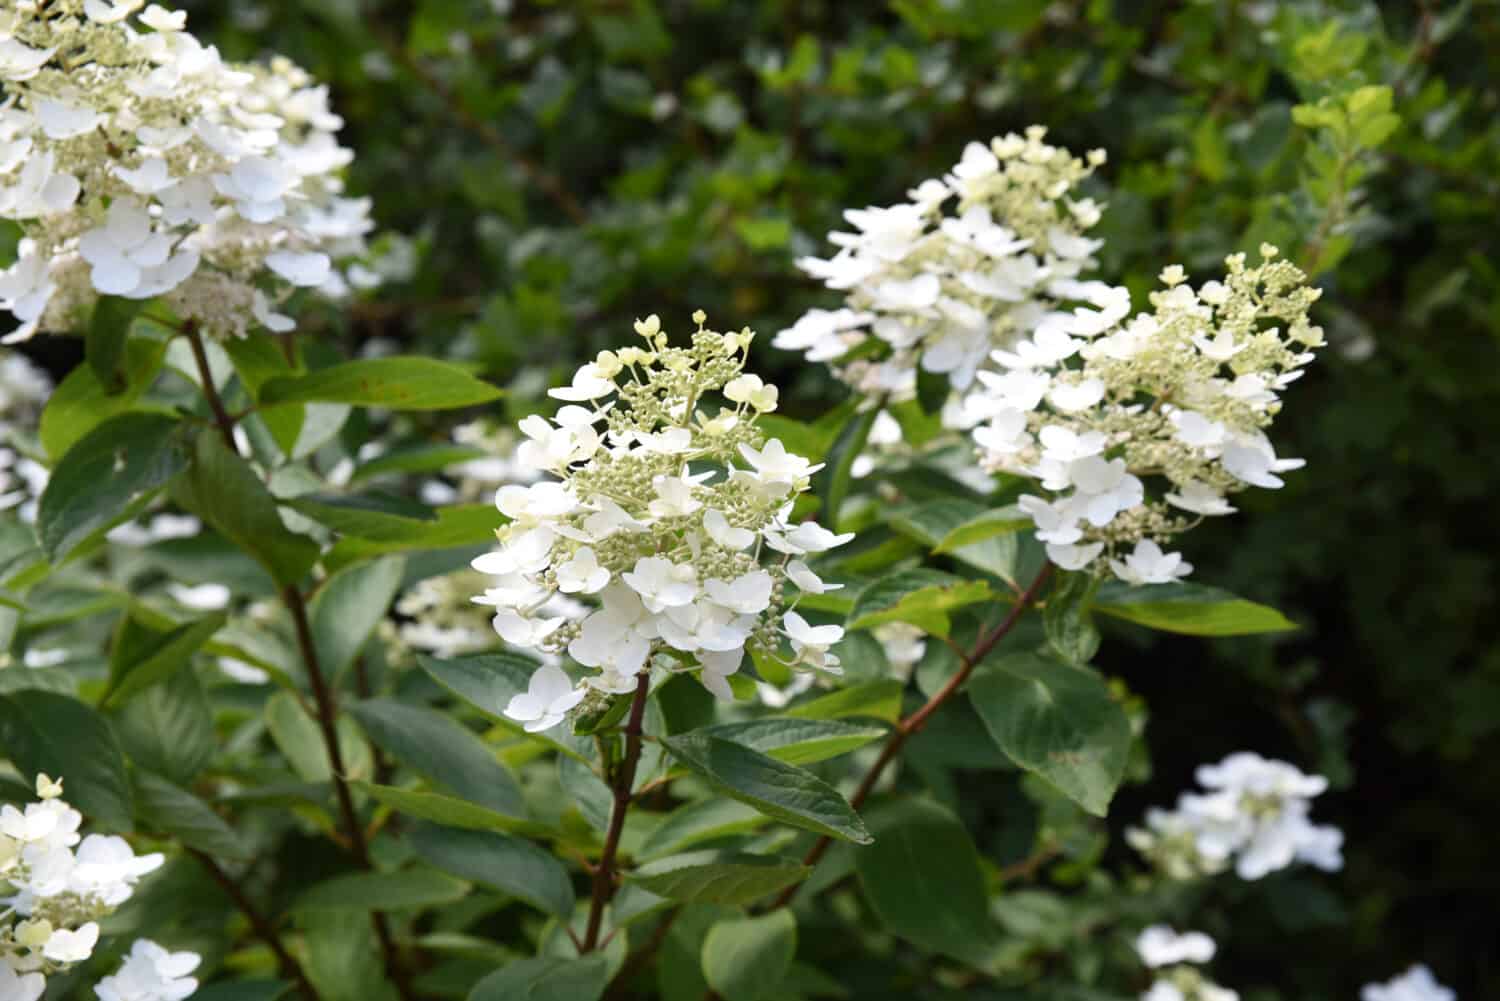 Hydrangea paniculata Unique: hydrangea blooms white flowers on a branch in the garden in late summer